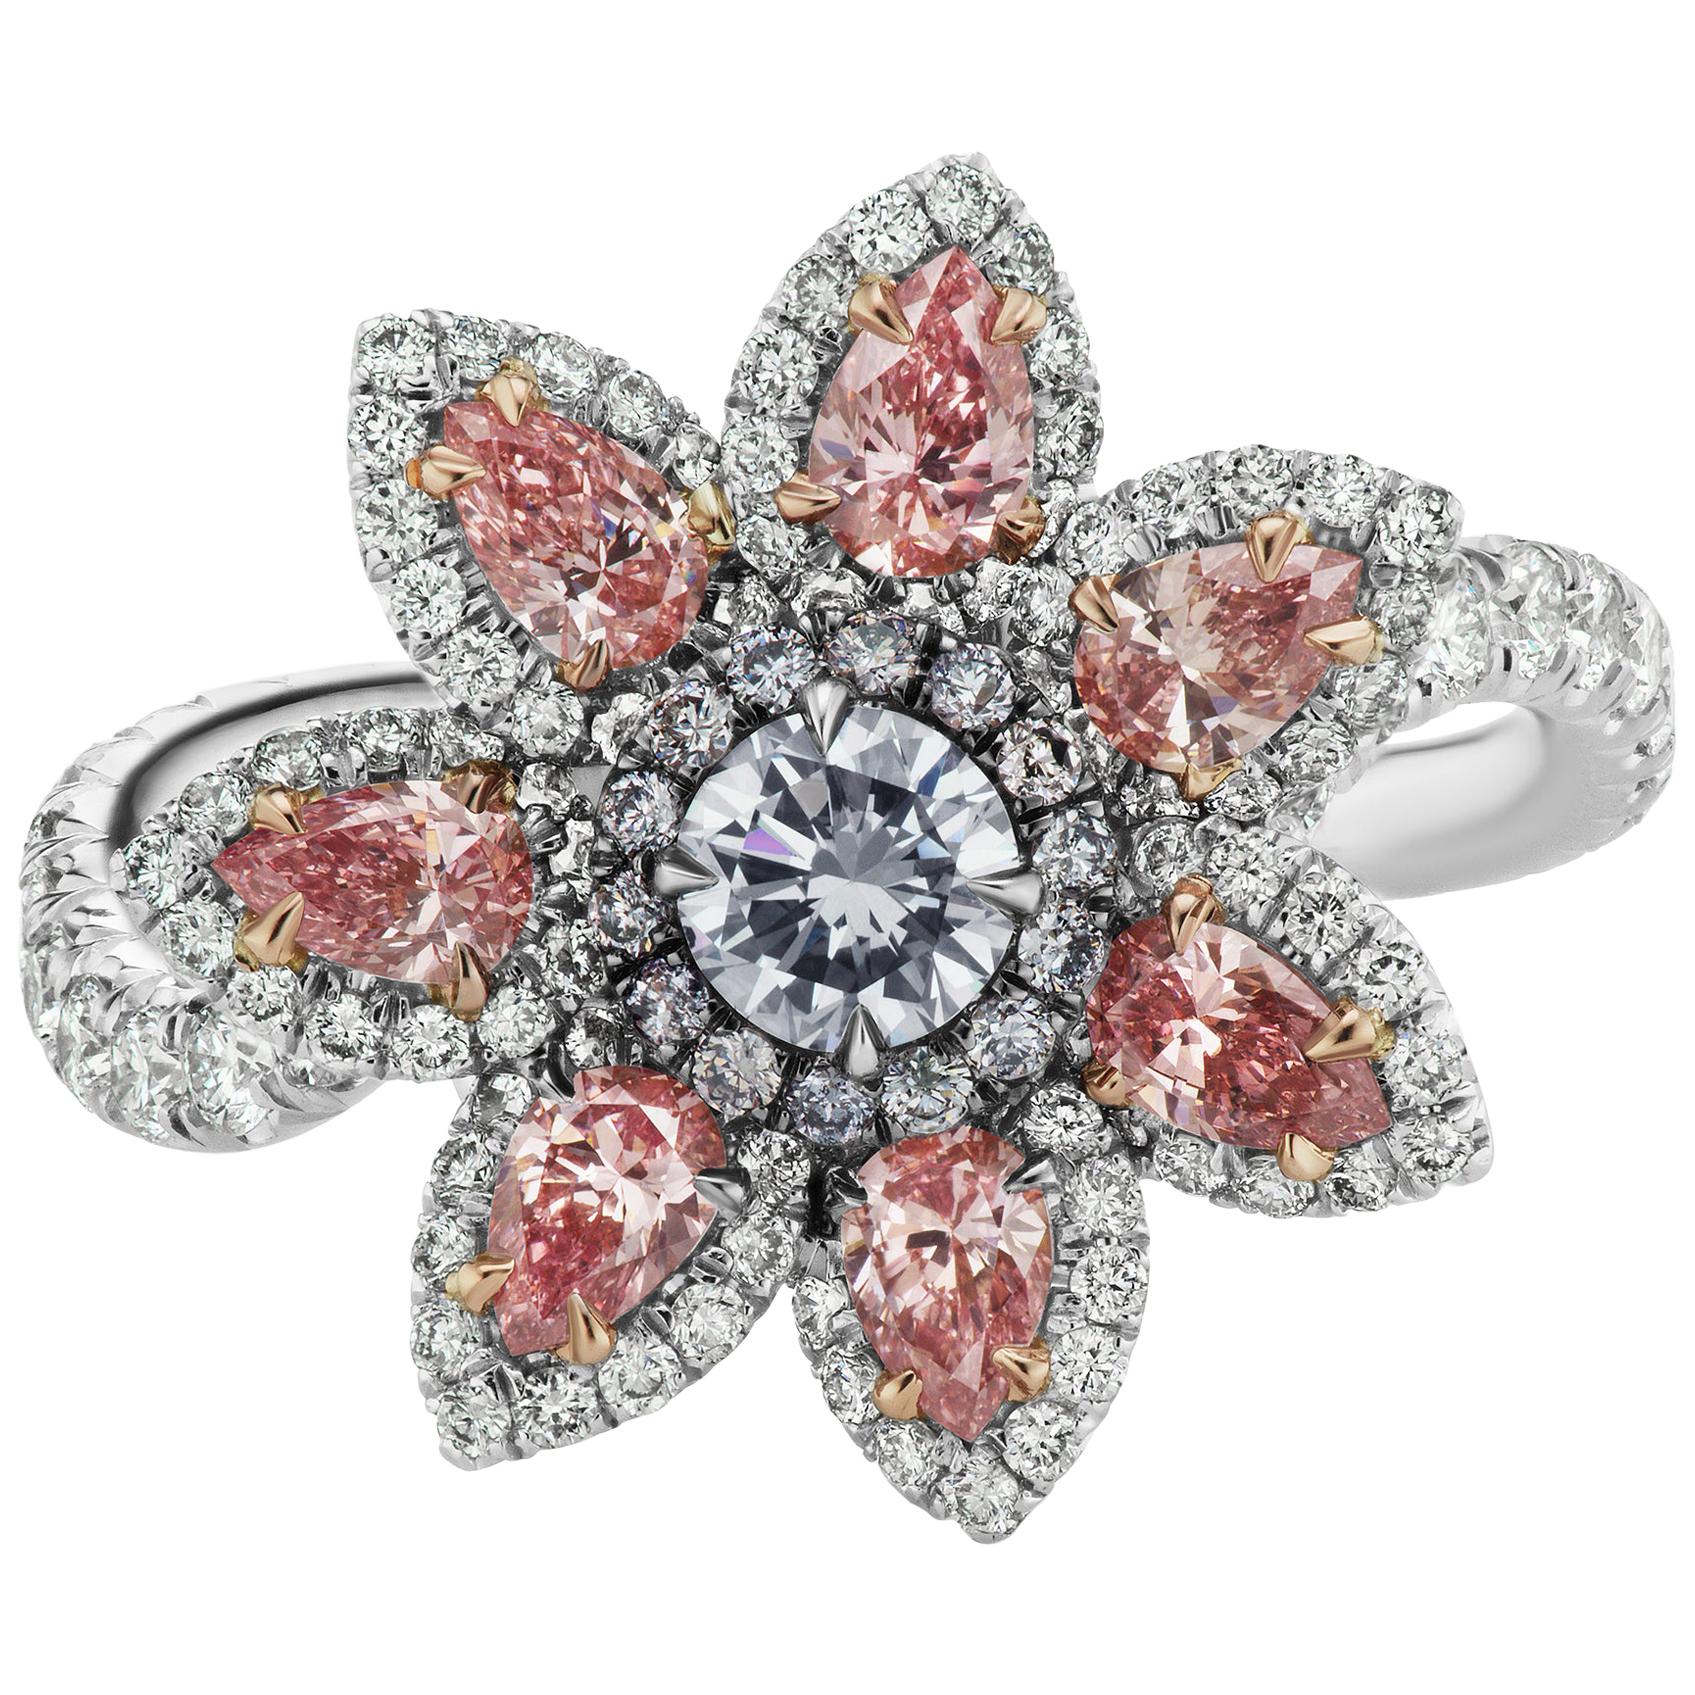 GIA Certified Argyle Fancy Pink and Fancy Light Blue Diamond Flower Ring/Pendant